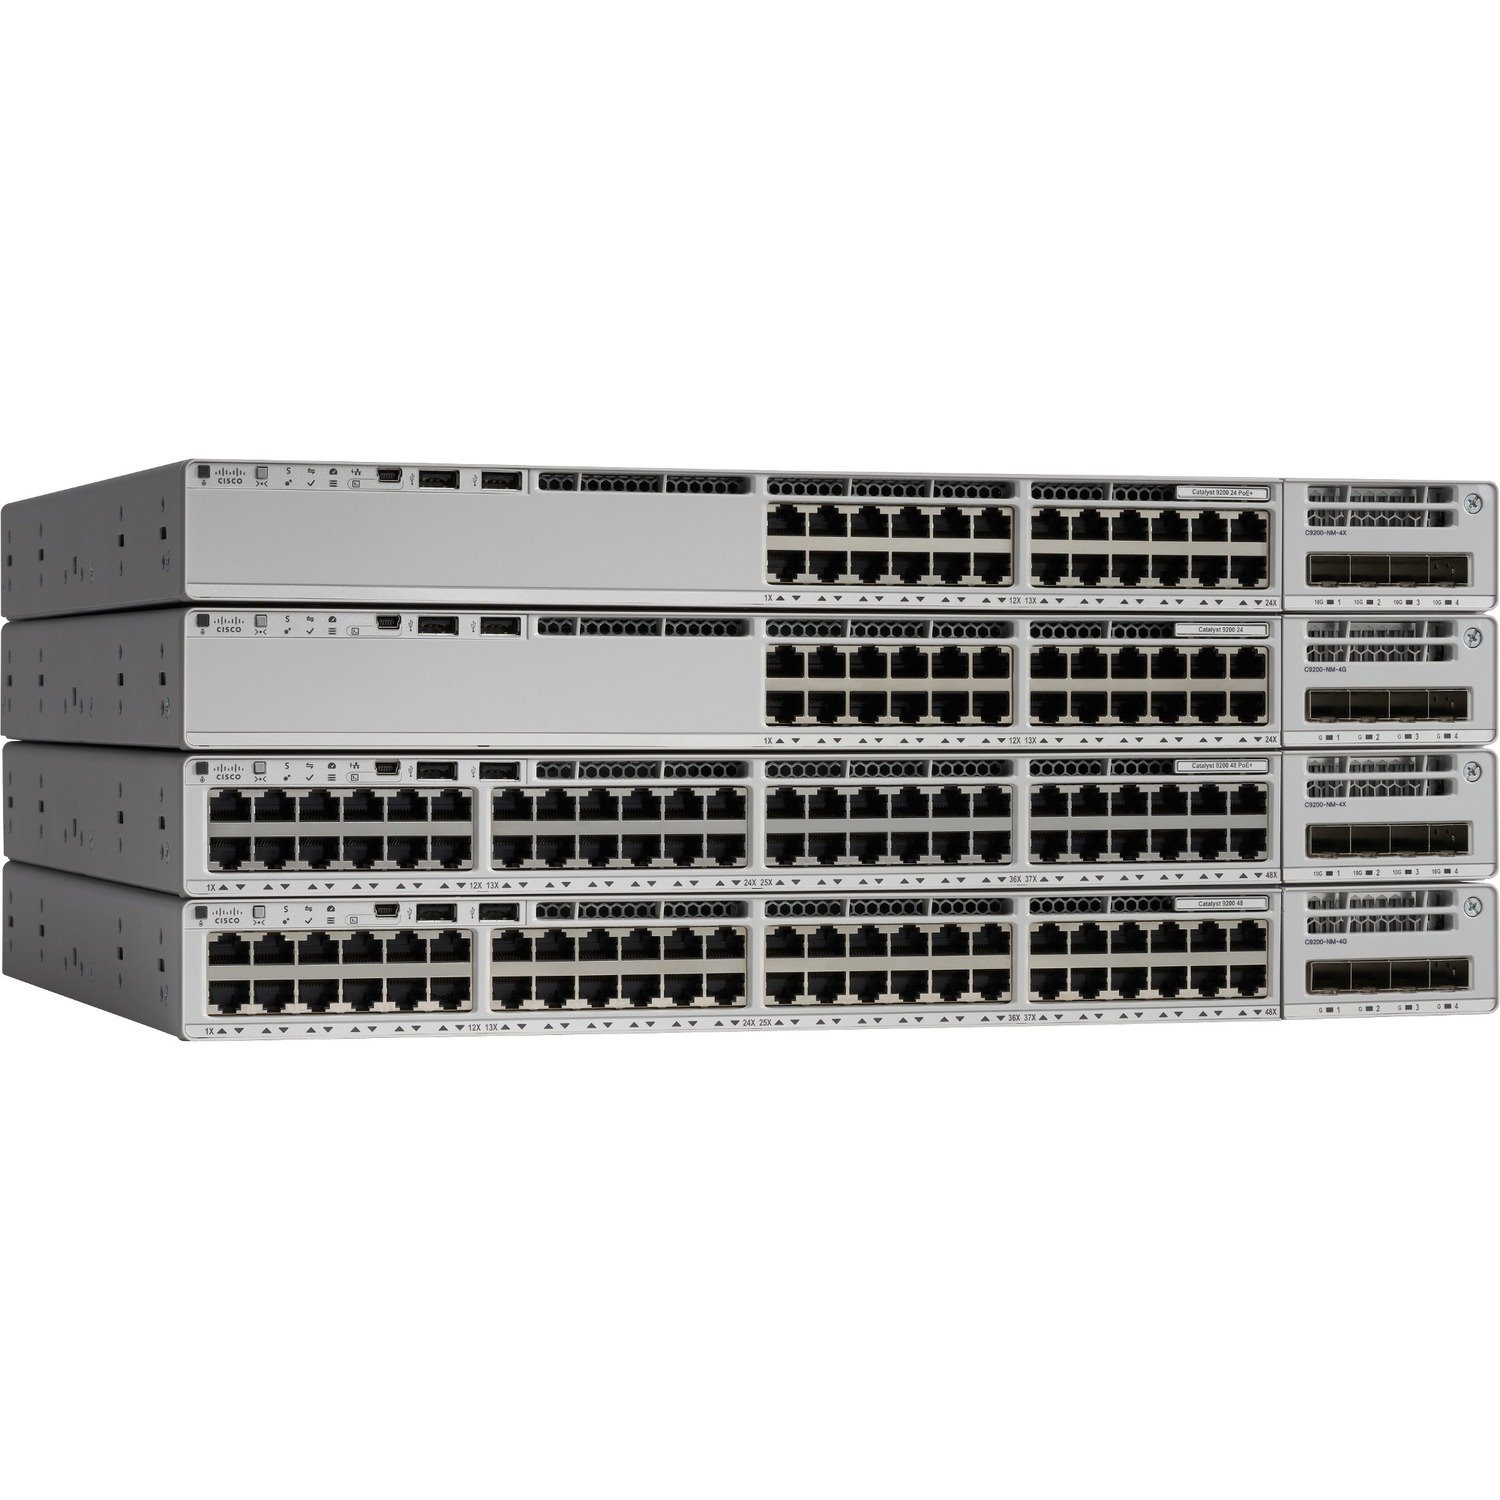 Cisco Catalyst 9200 C9200-24T 24 Ports Manageable Layer 3 Switch